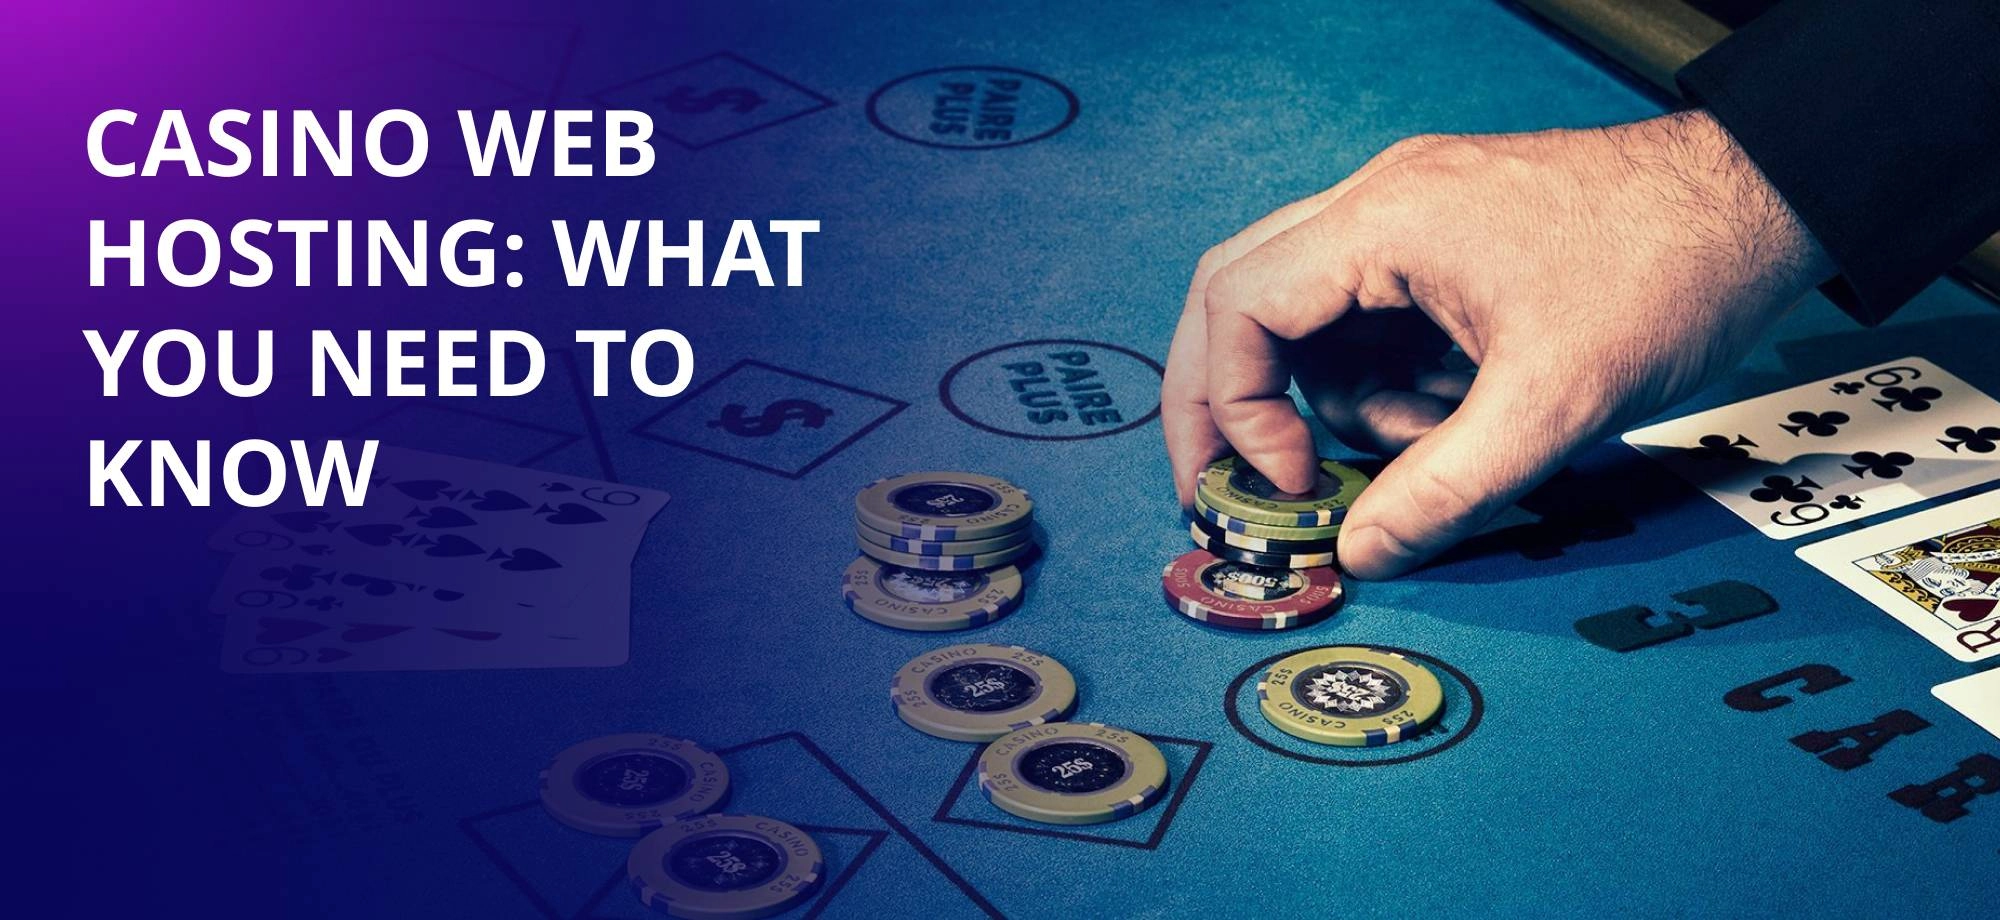 Casino Web Hosting: What You Need To Know